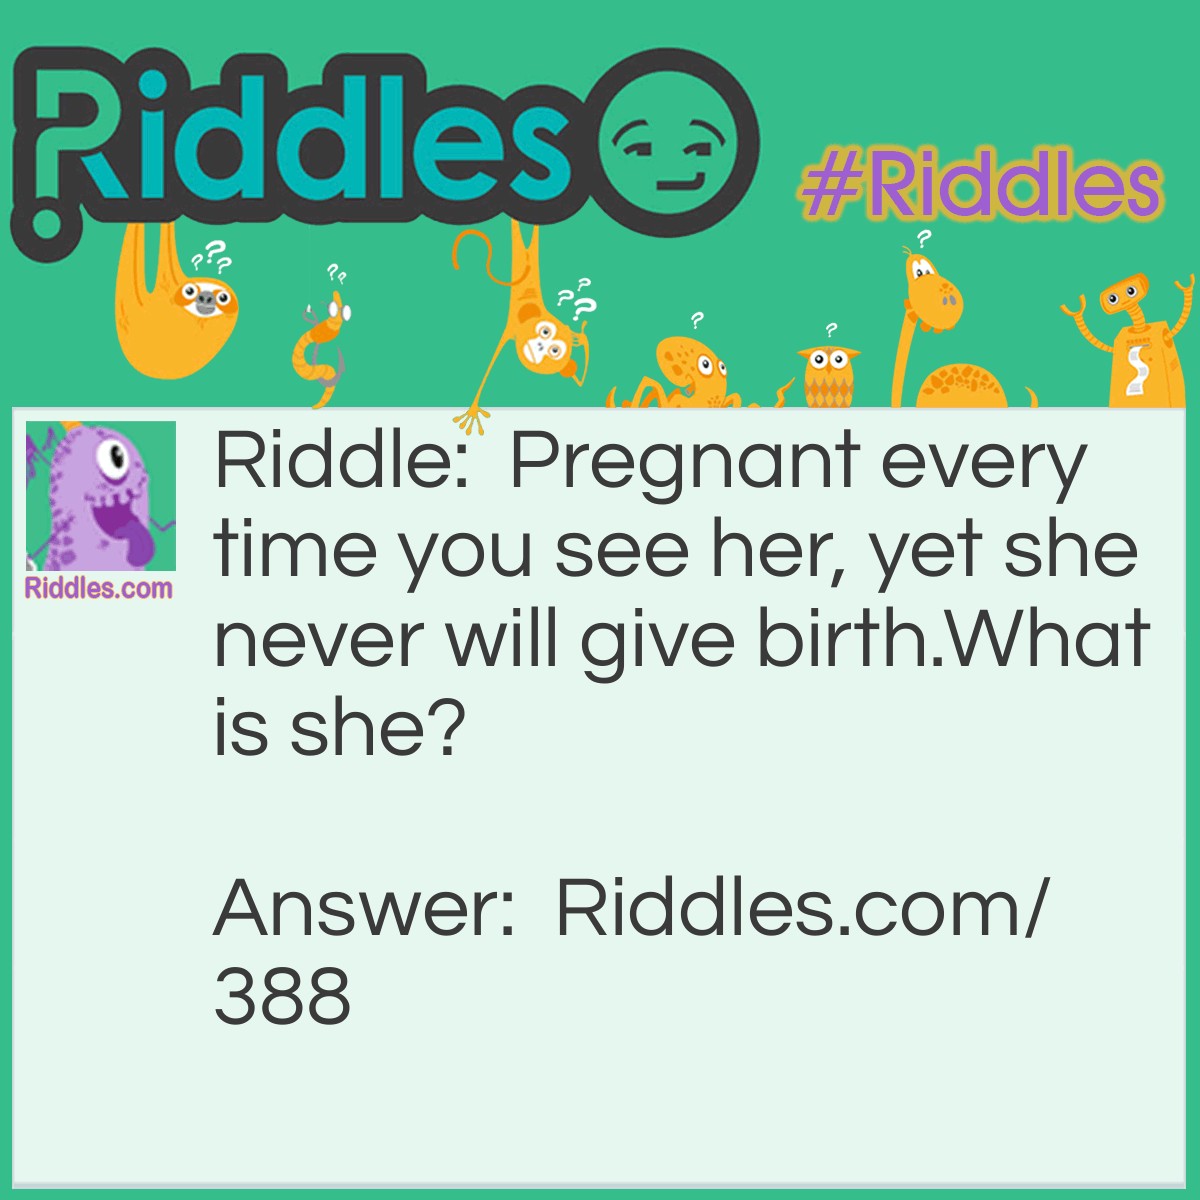 Riddle: Pregnant every time you see her, 
yet she never will give birth.
What is she? Answer: Full moon.
